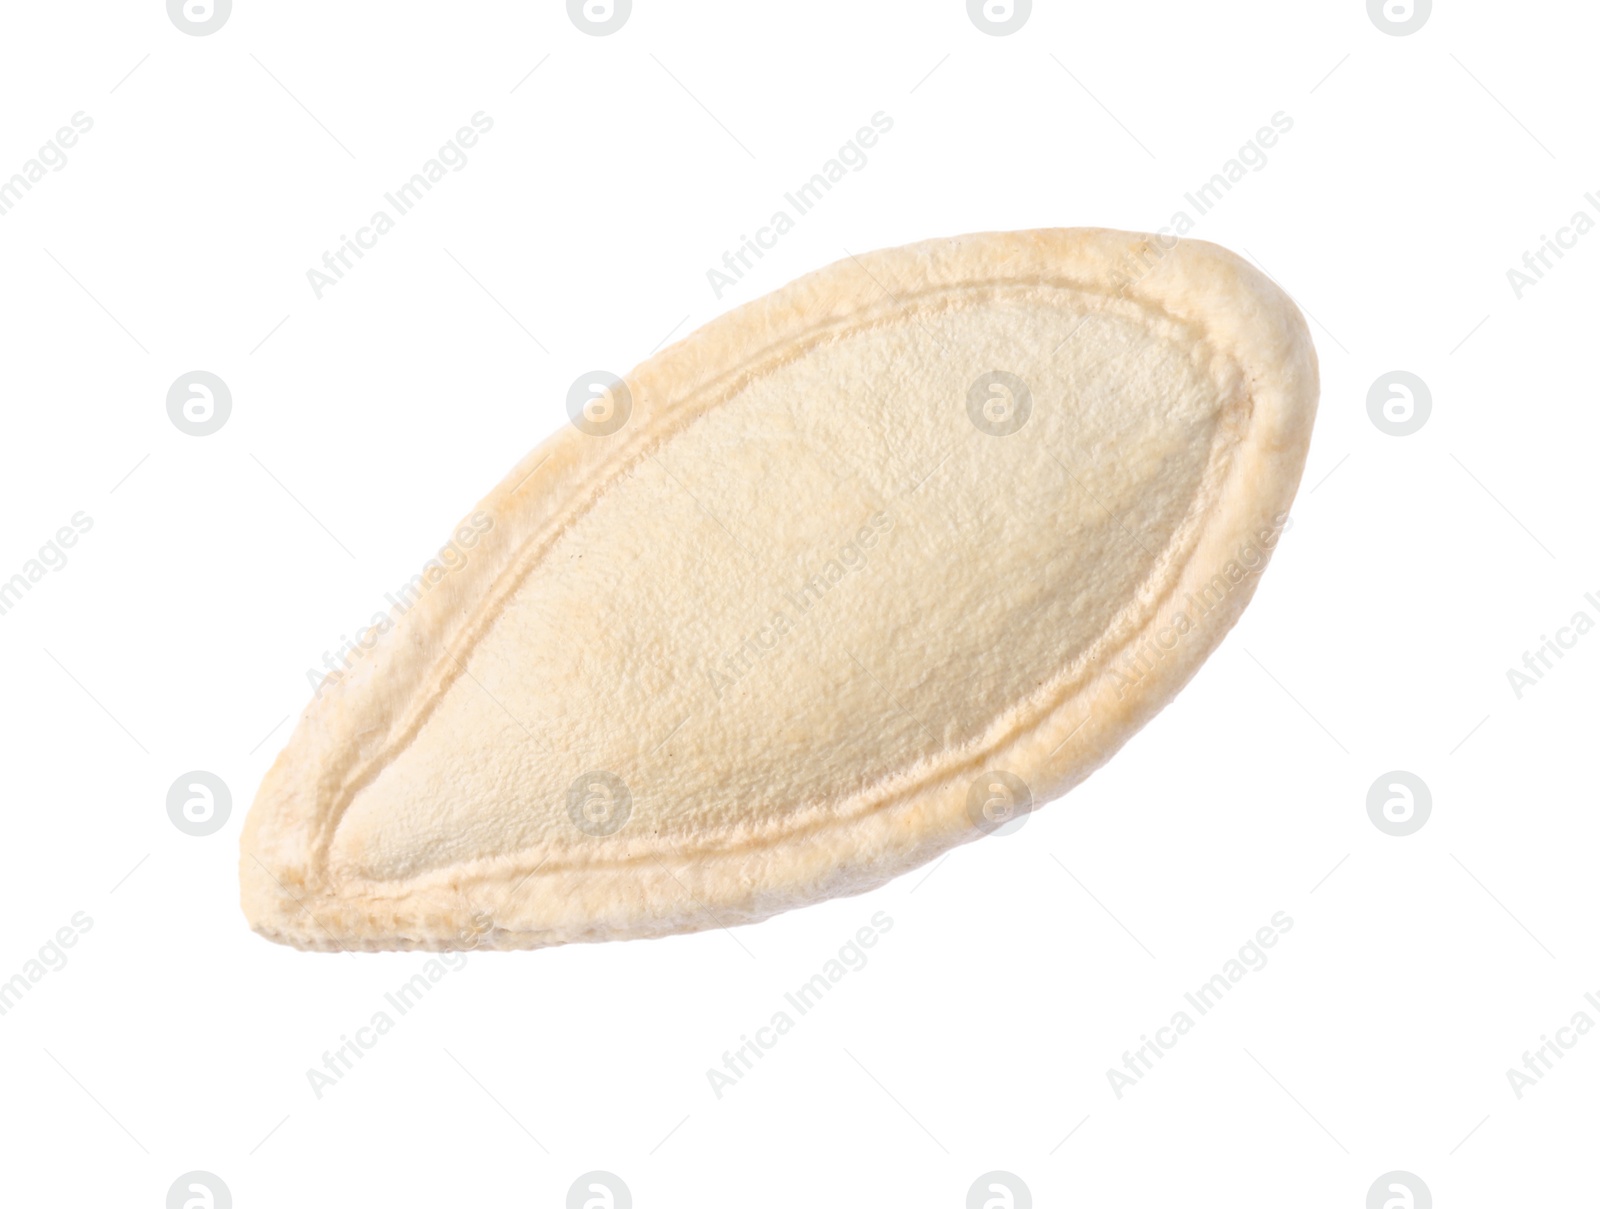 Photo of One dried pumpkin seed isolated on white